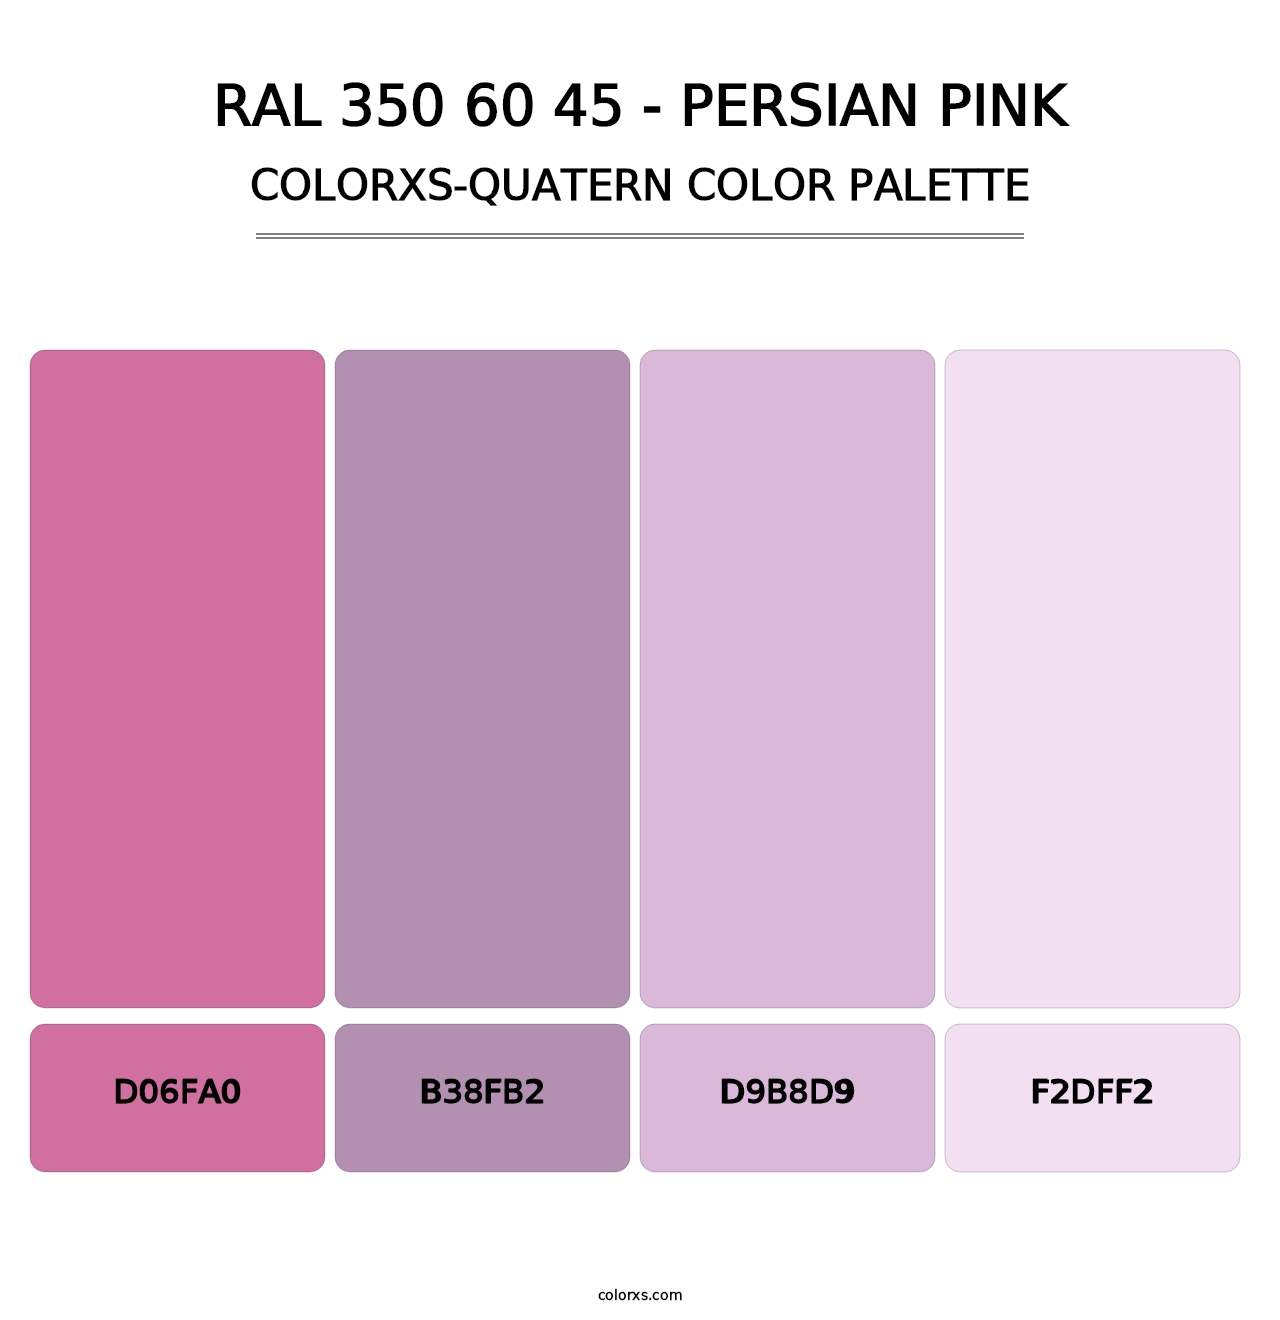 RAL 350 60 45 - Persian Pink - Colorxs Quatern Palette